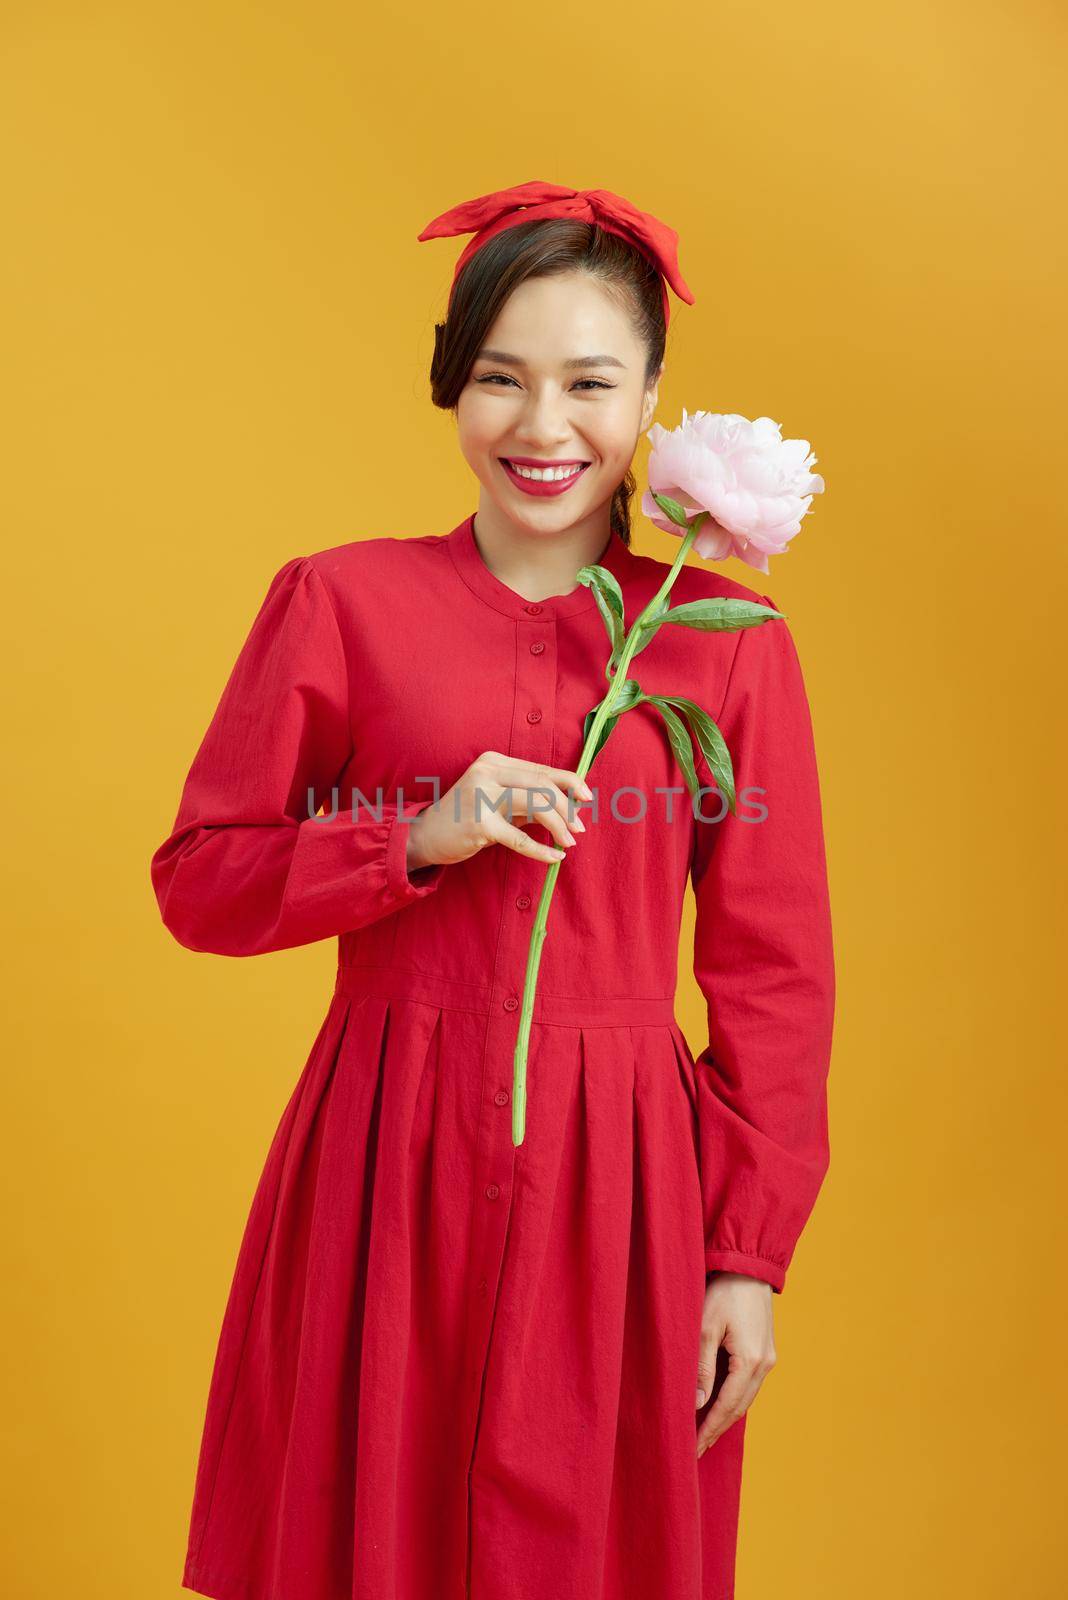 Stylish girl in white floral shirt gently holding peony flower in hands